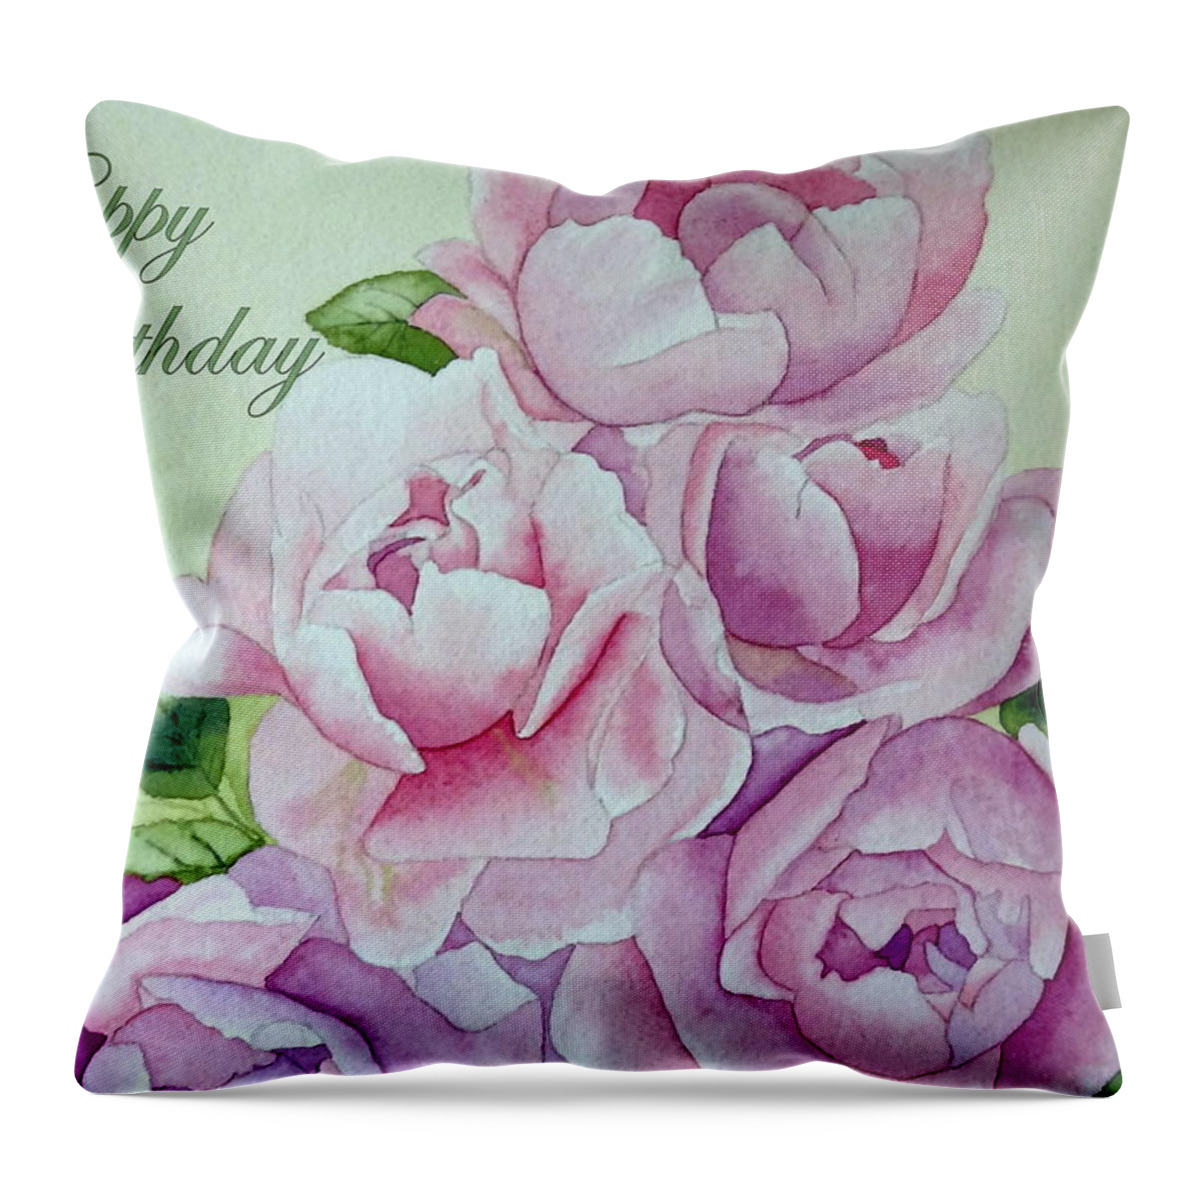 Roses Peonies Throw Pillow featuring the painting Birthday Peonies by Laurel Best